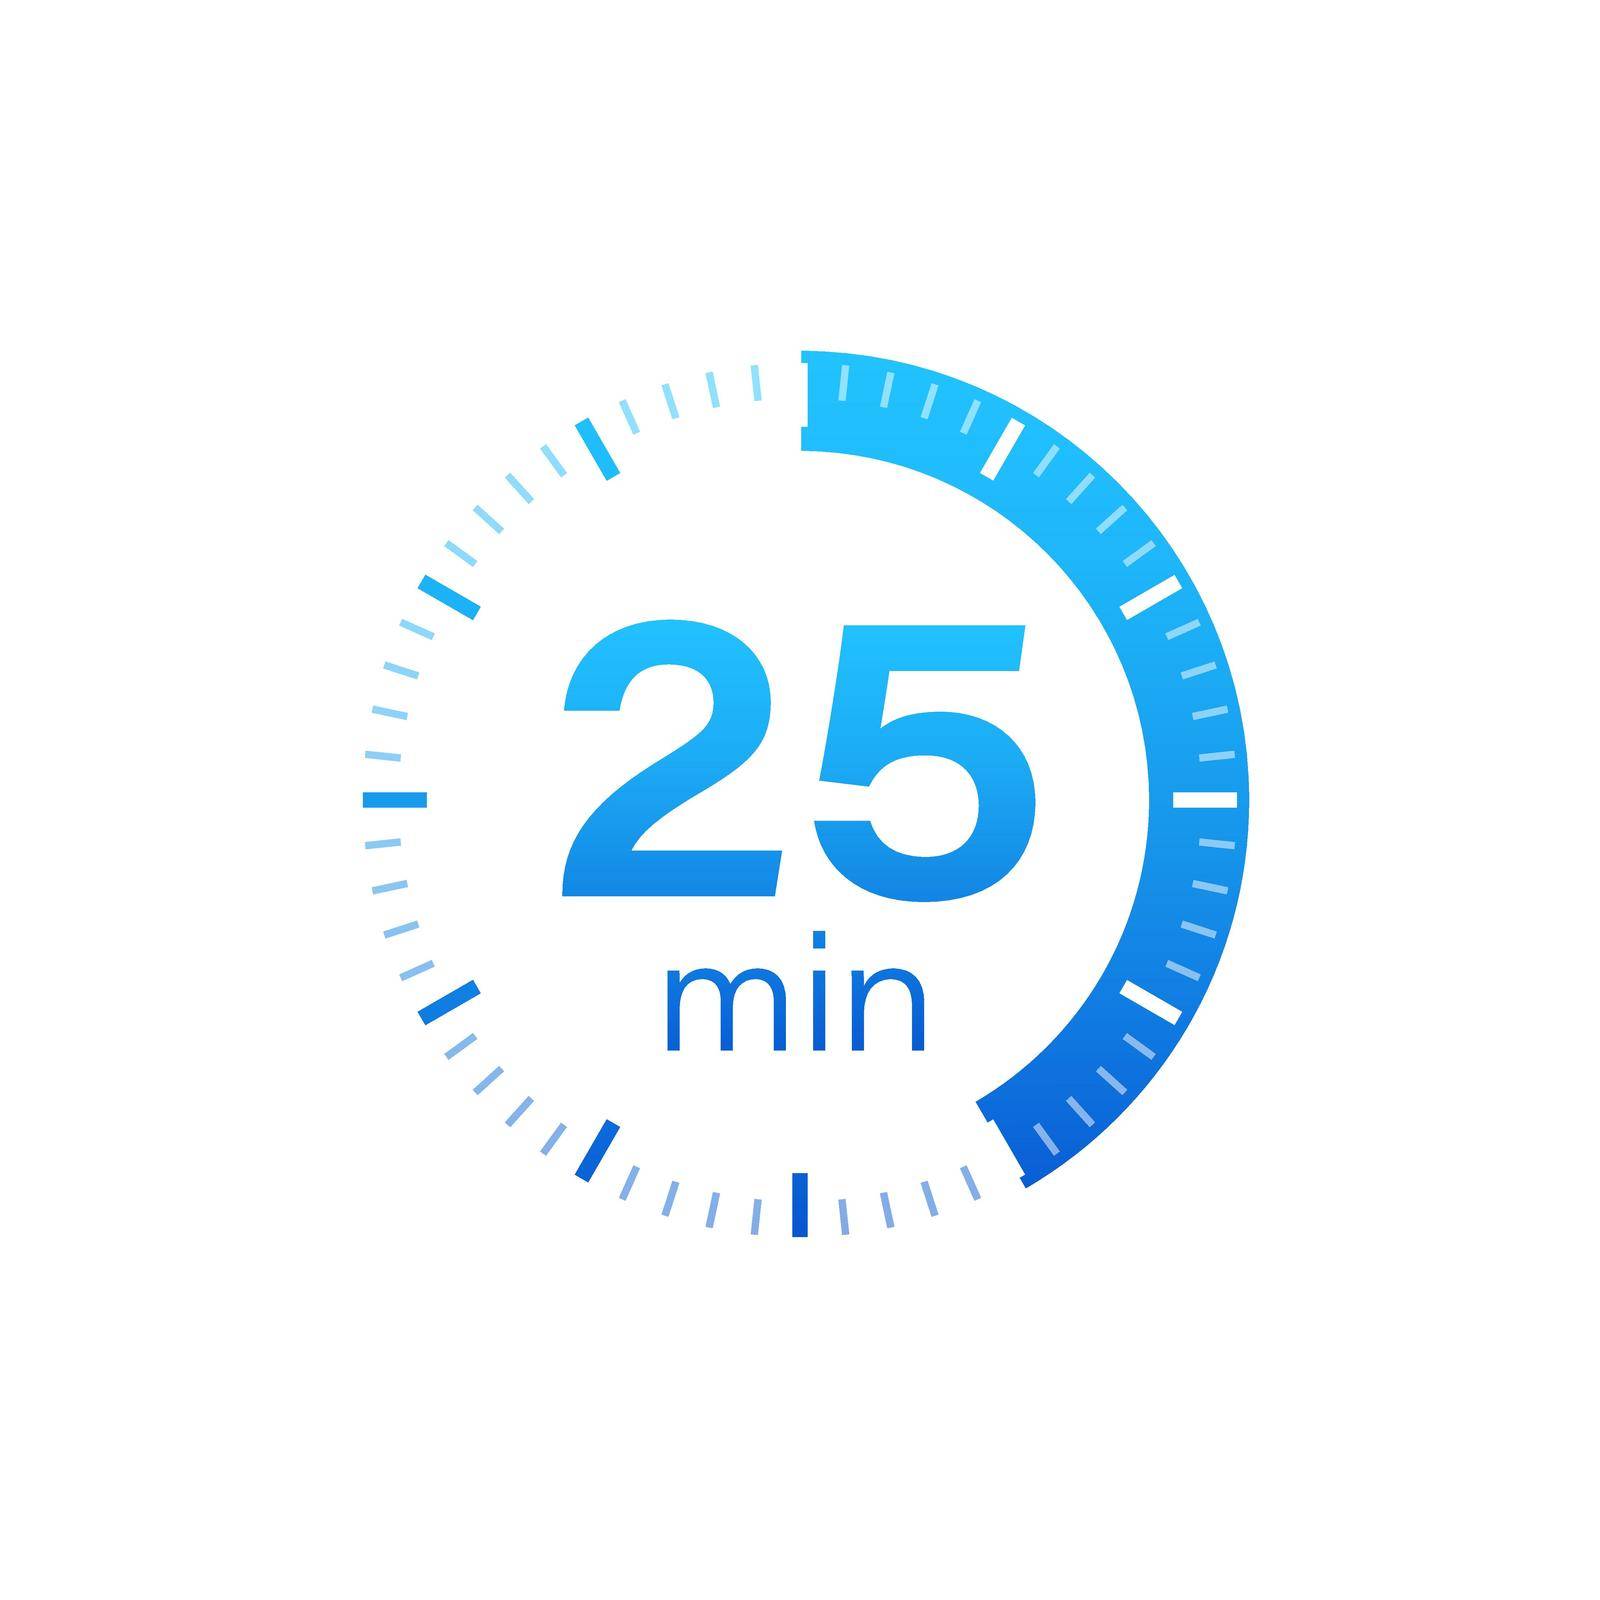 The 25 minutes, stopwatch vector icon. Stopwatch icon in flat style on a white background. Vector stock illustration